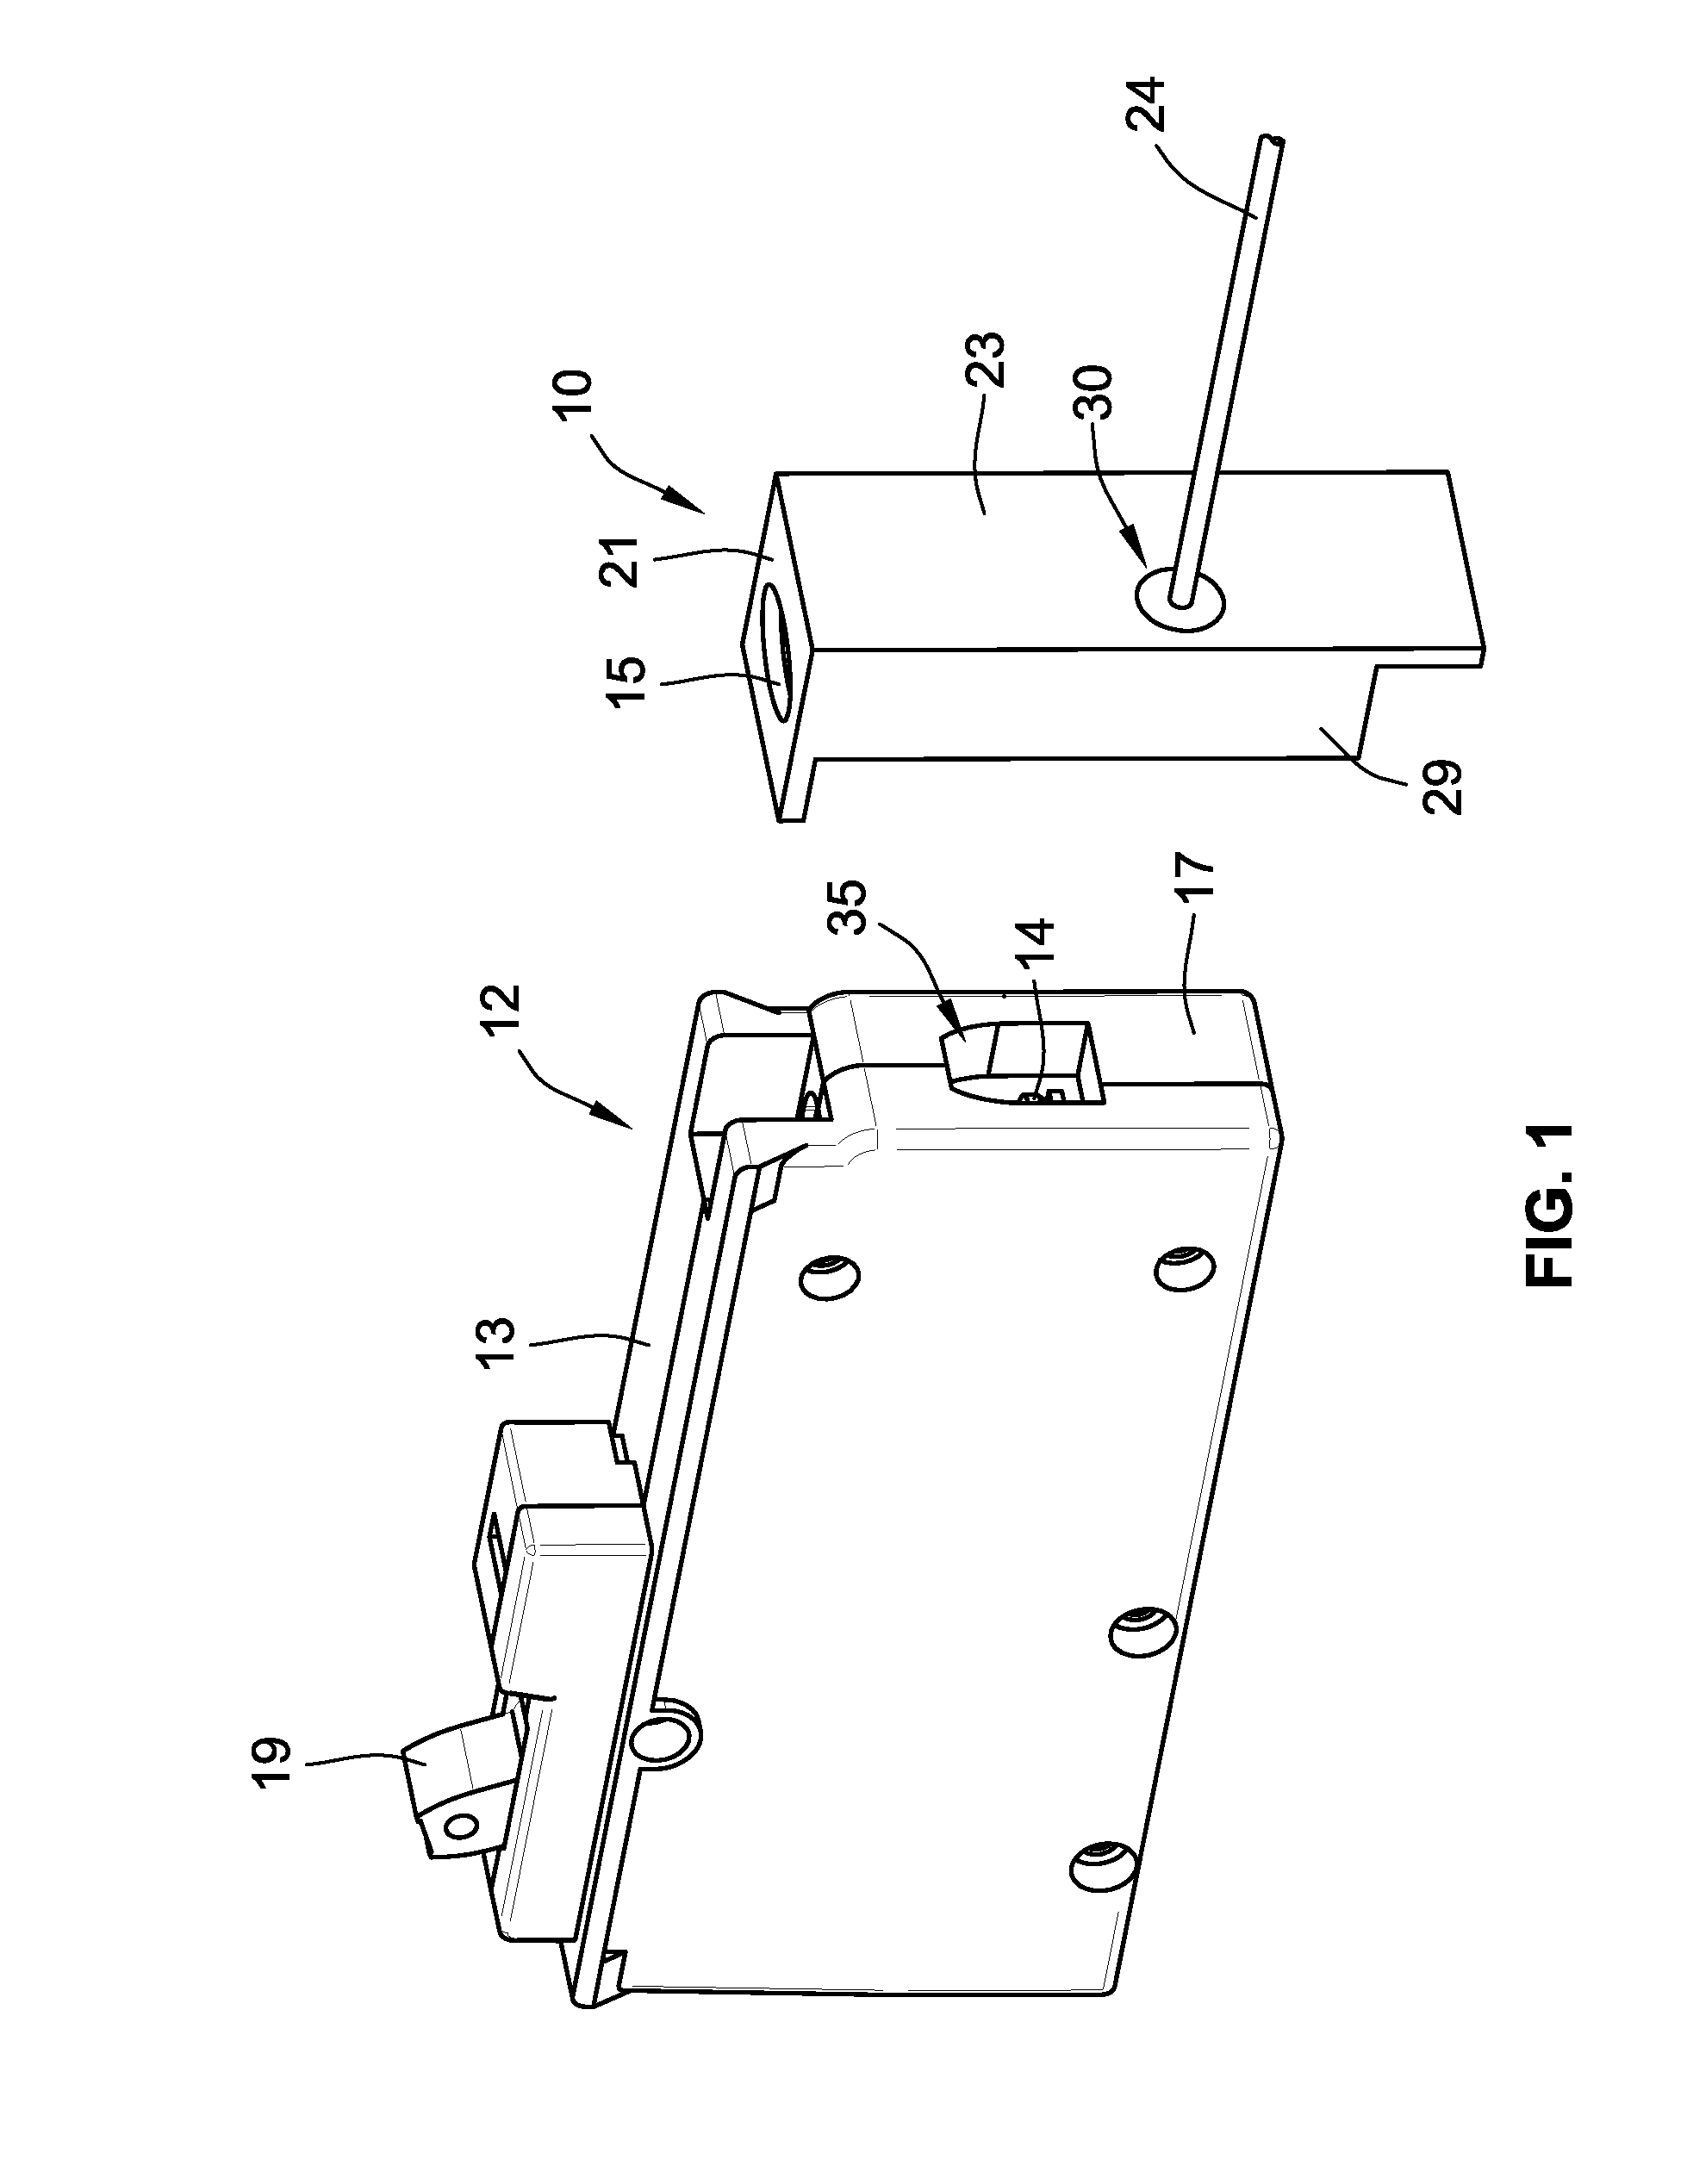 Terminal shield with integrated current transformer